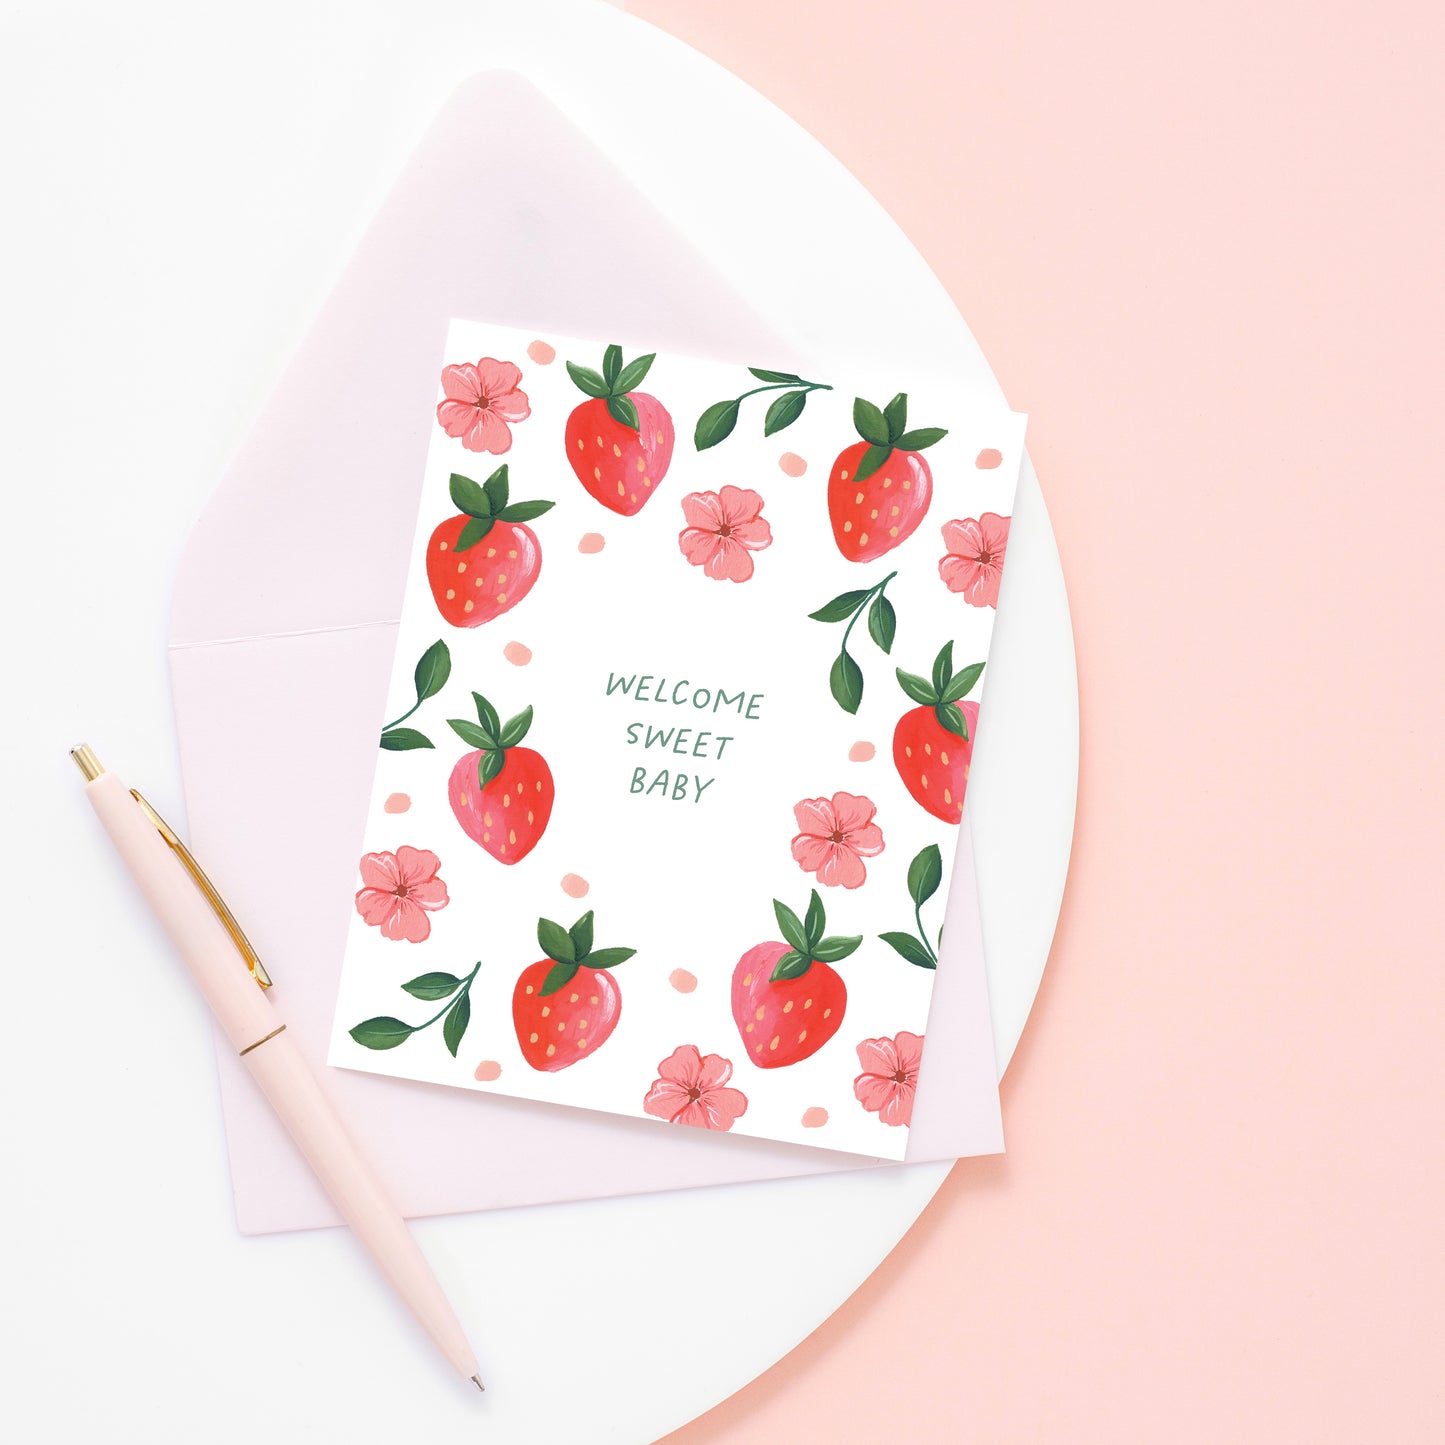 Sweet Strawberry Baby Greeting Card